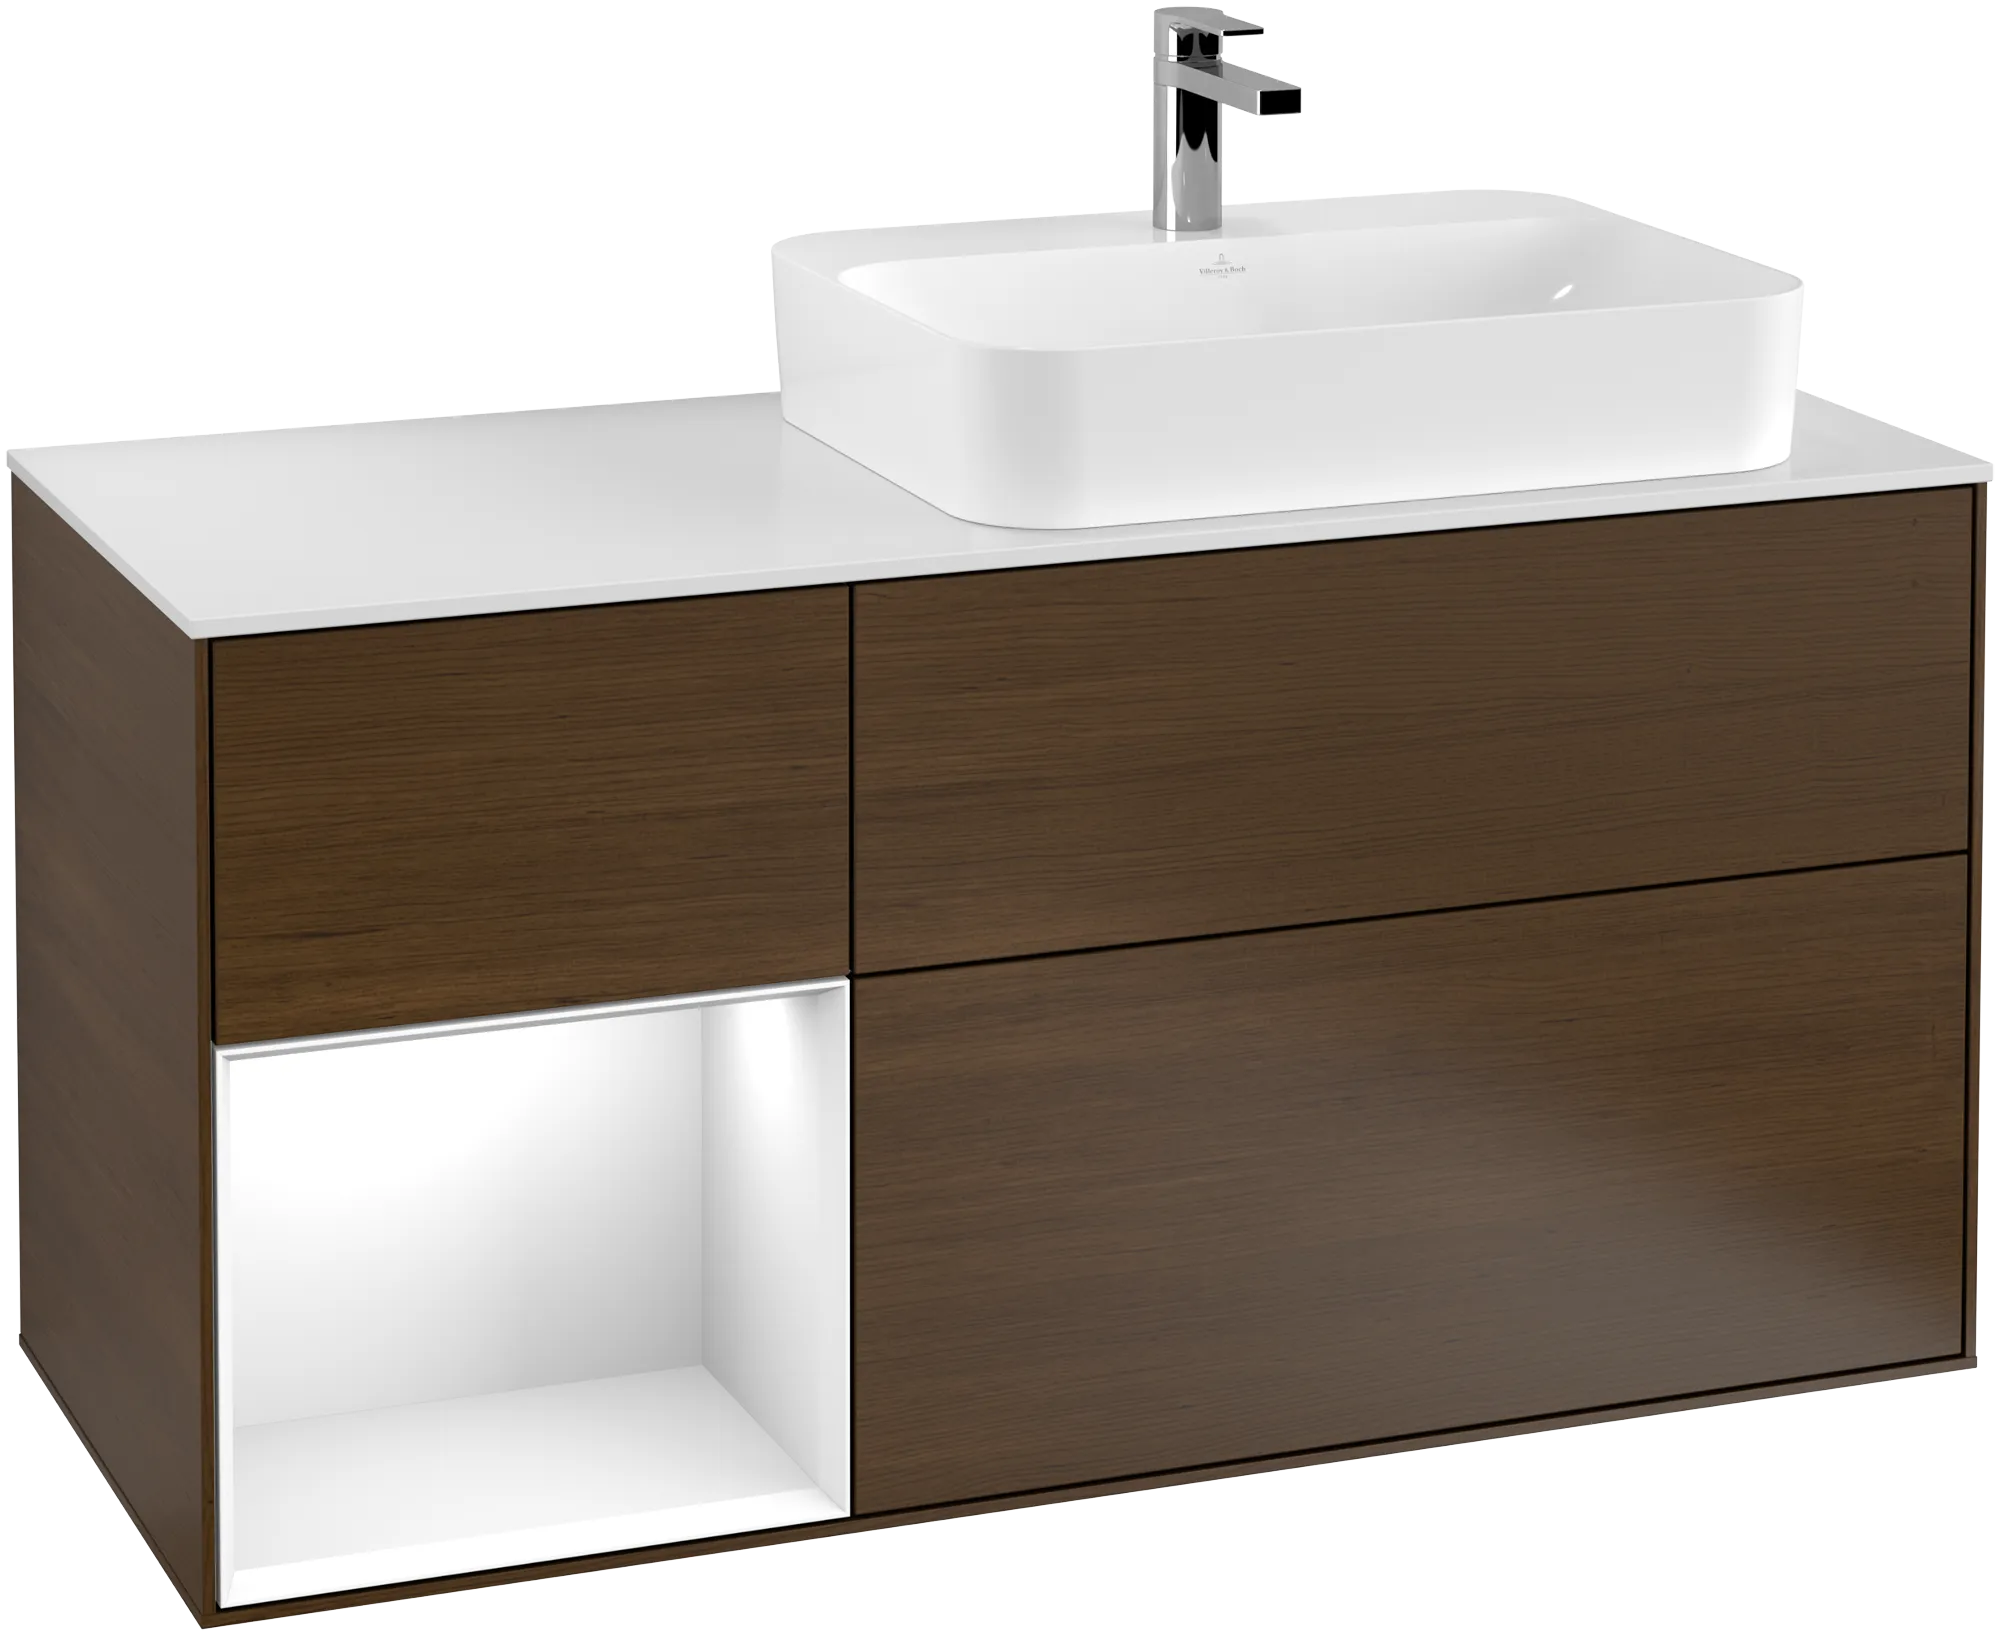 Picture of VILLEROY BOCH Finion Vanity unit, with lighting, 3 pull-out compartments, 1200 x 603 x 501 mm, Walnut Veneer / Glossy White Lacquer / Glass White Matt #G391GFGN